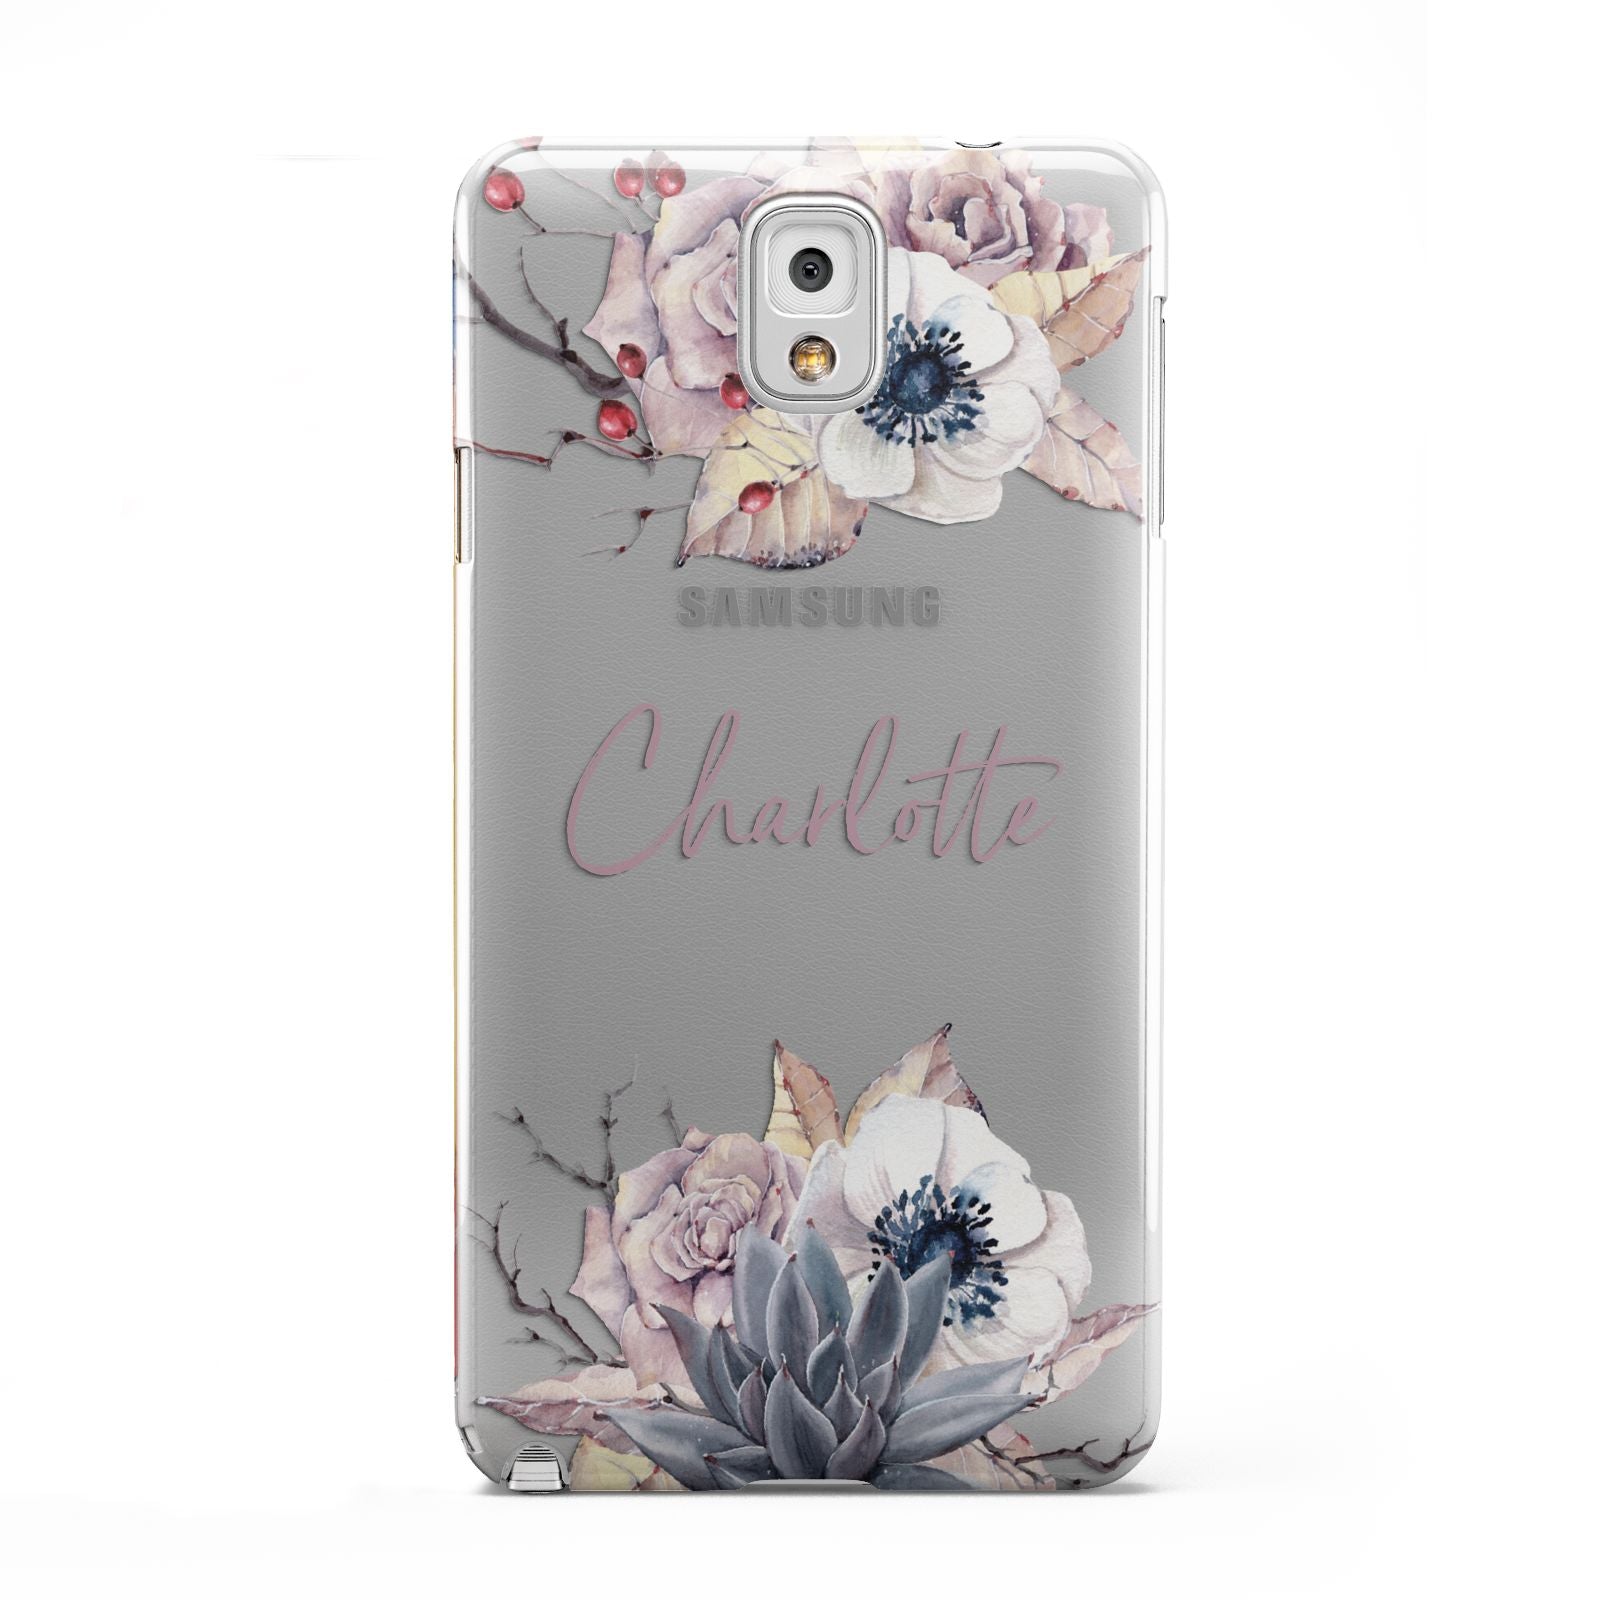 Personalised Autumn Floral Samsung Galaxy Note 3 Case